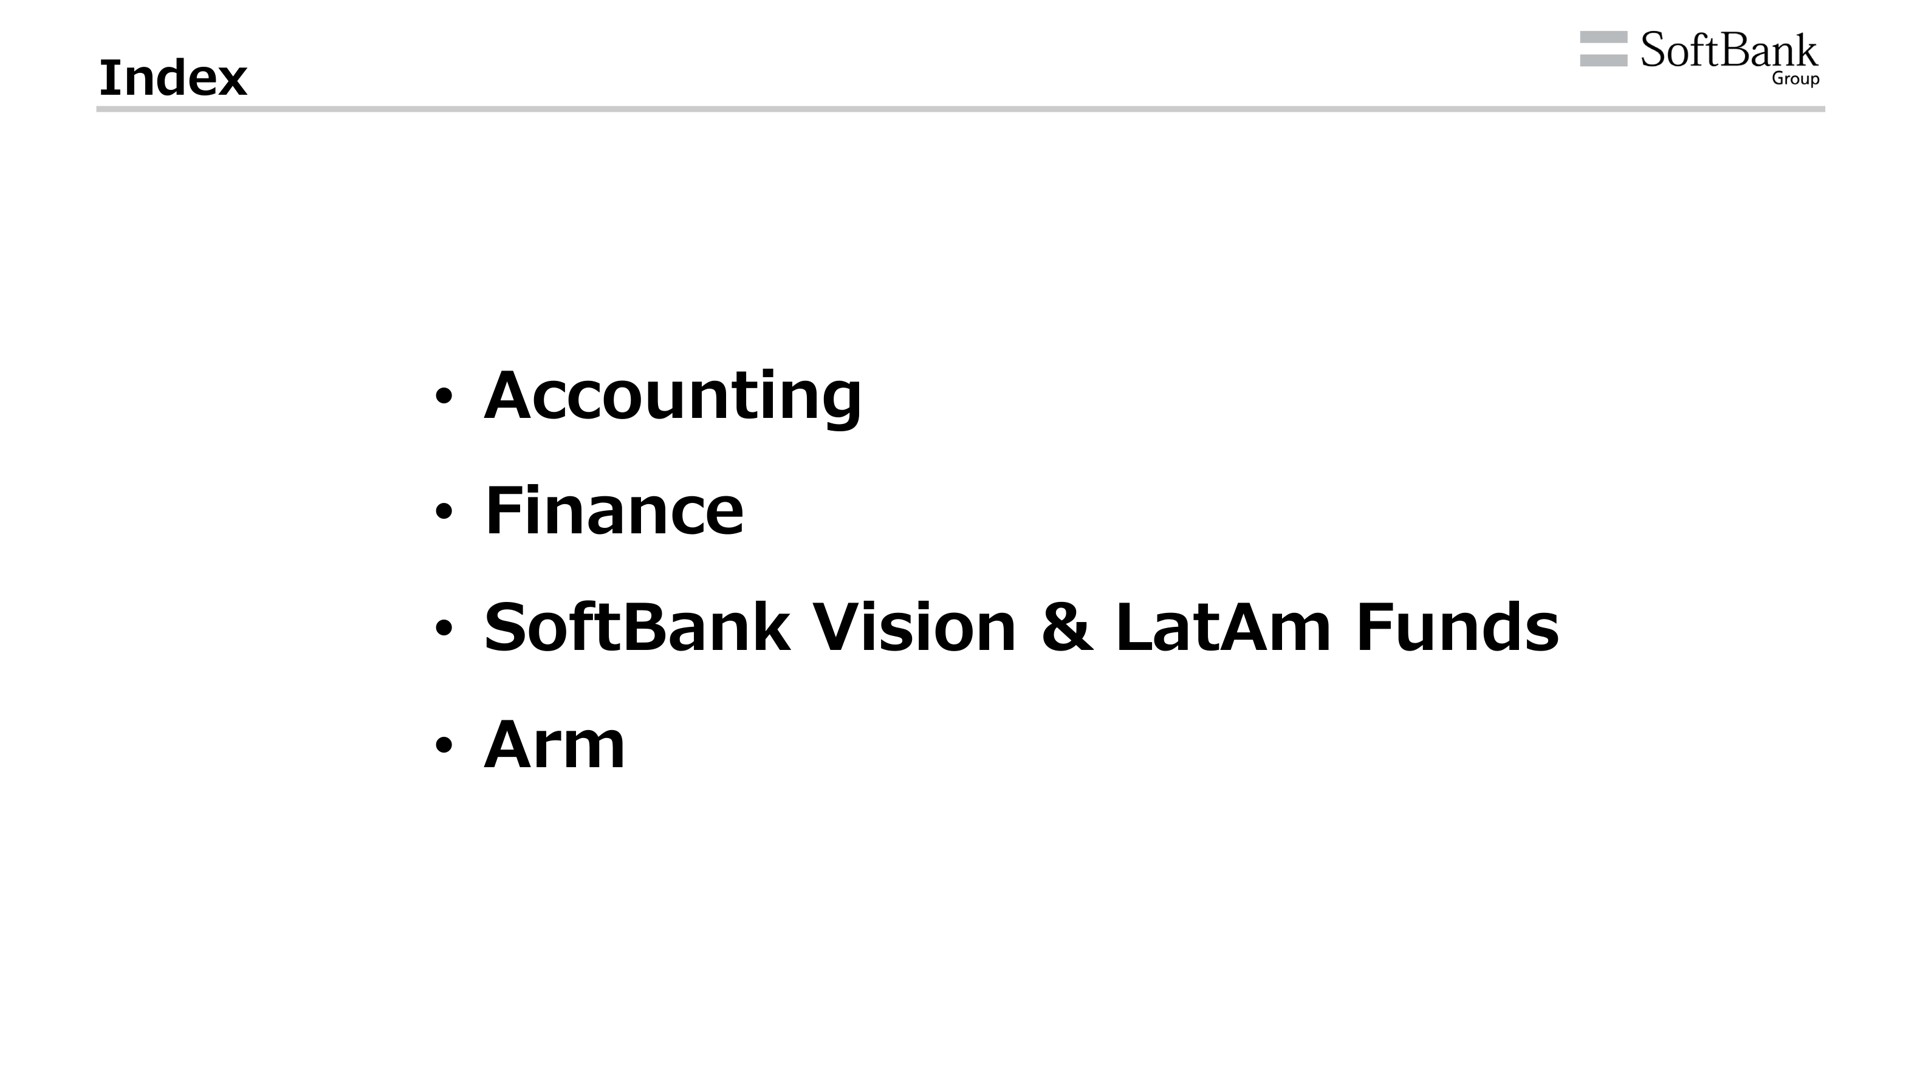 index accounting finance vision funds arm | SoftBank